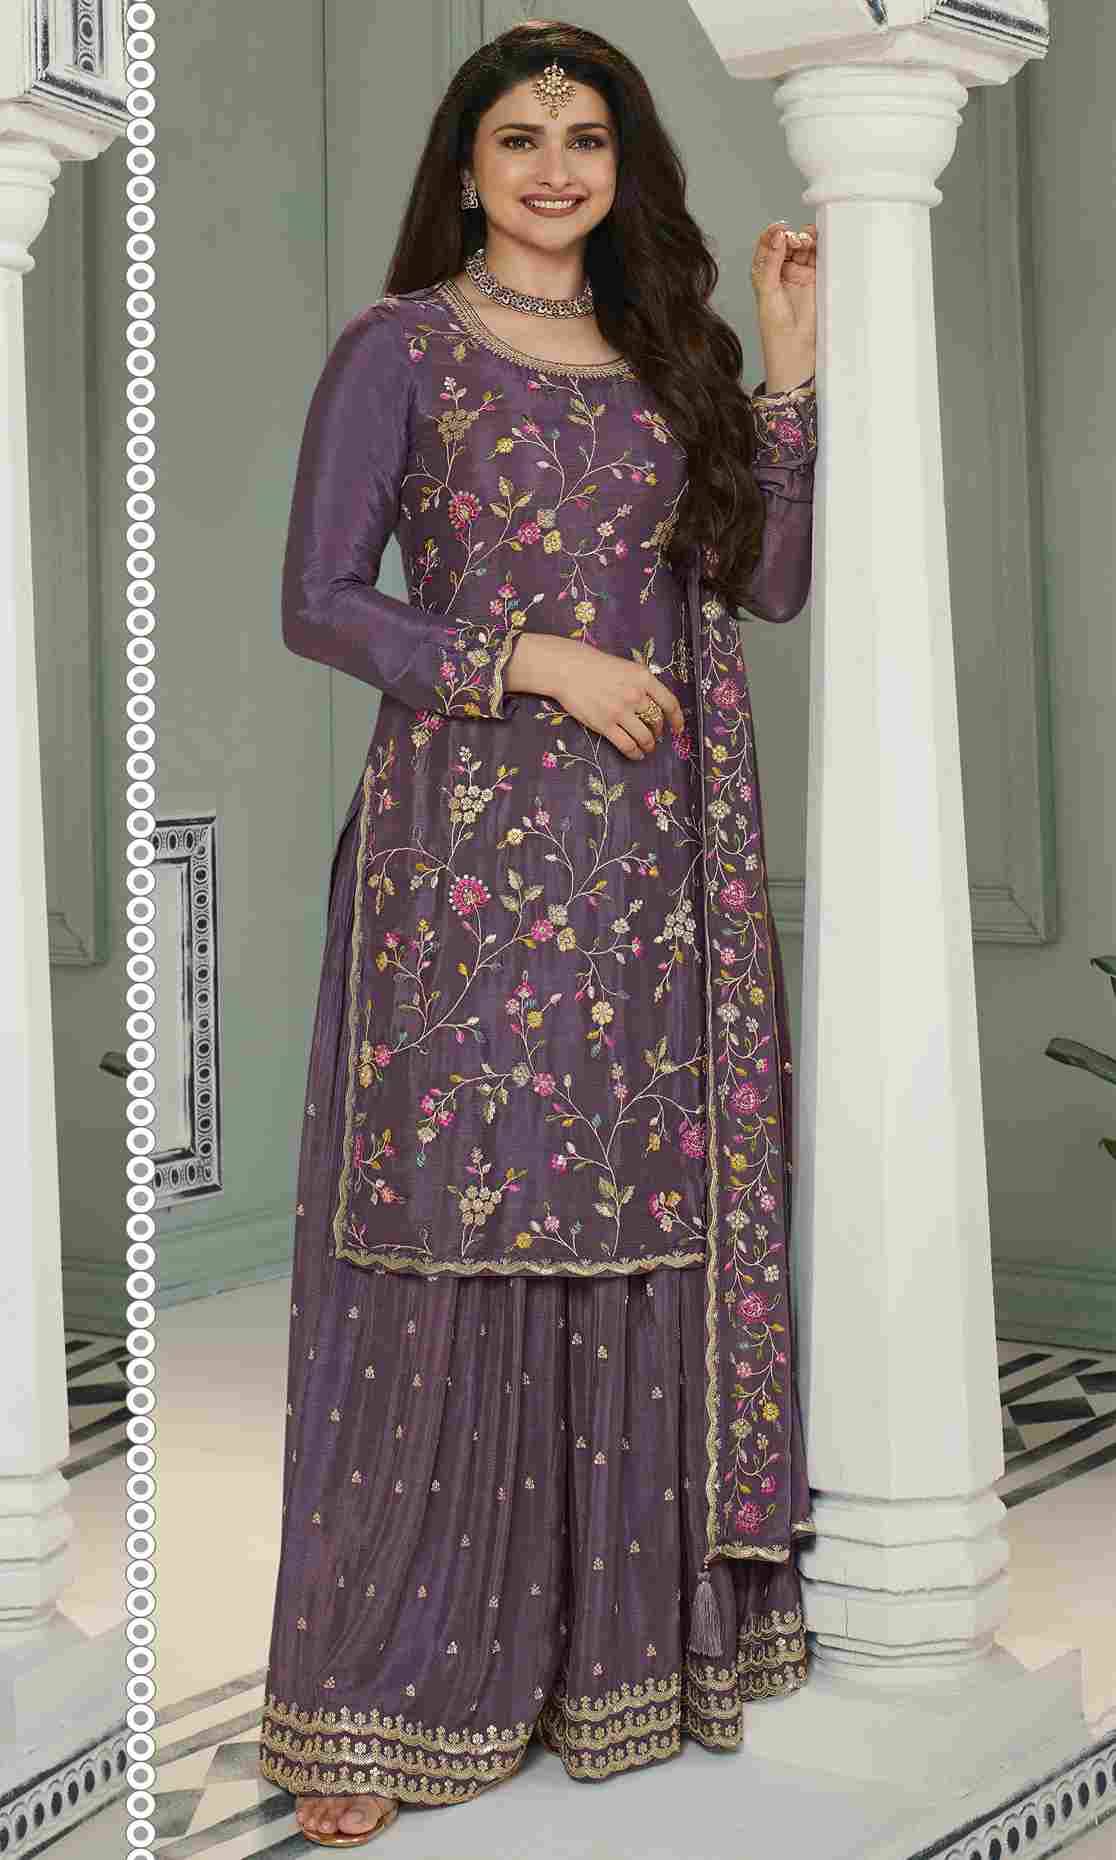 Avanti Hitlist By Vinay Fashion Beautiful Stylish Sharara Suits Fancy Colorful Casual Wear & Ethnic Wear & Ready To Wear Chinnon Dresses At Wholesale Price